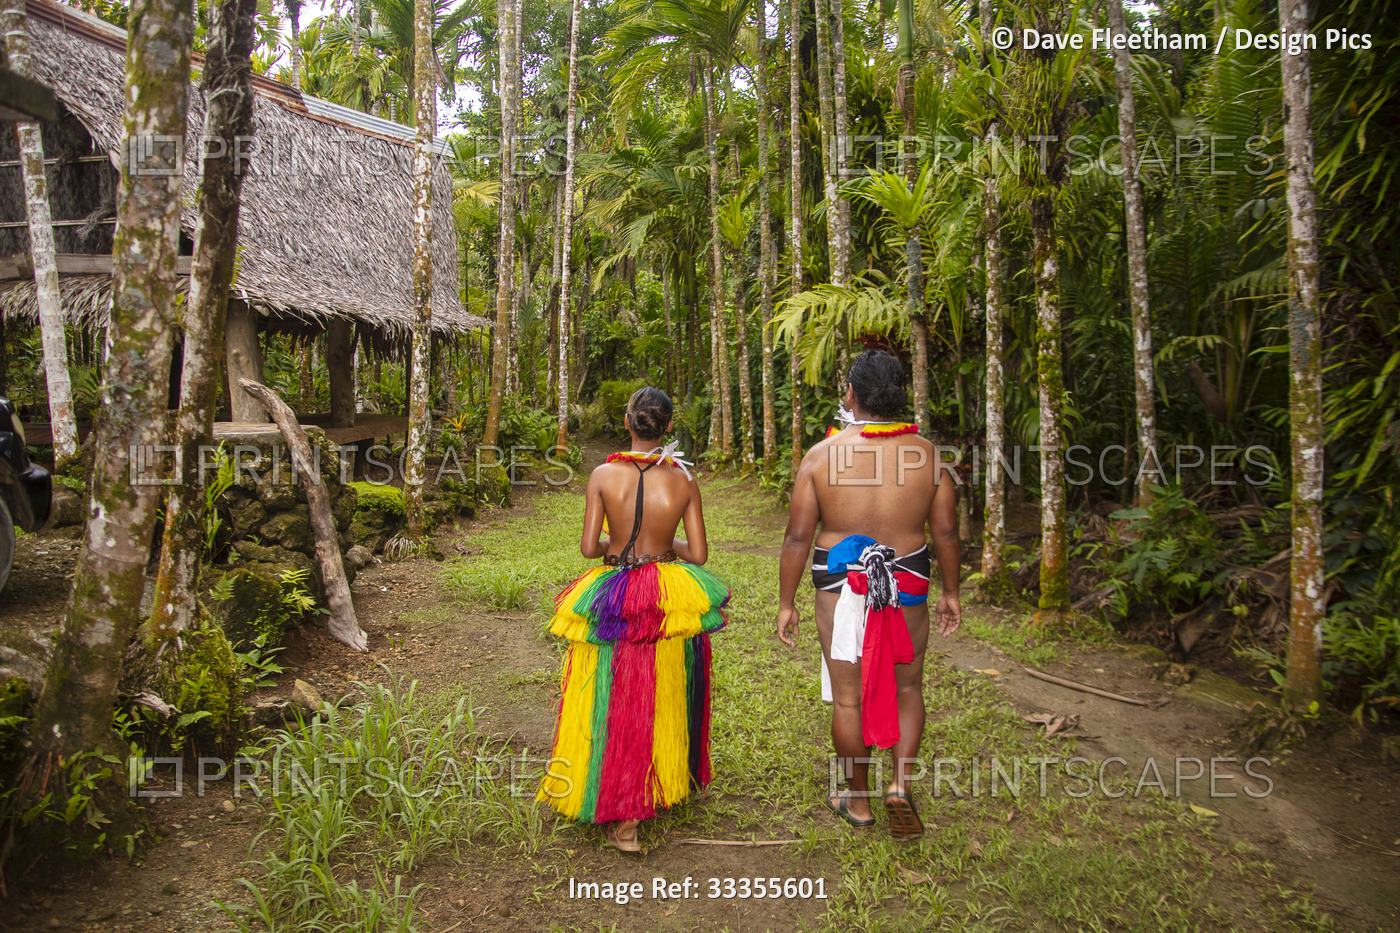 This couple is in a traditional outfit walking down a path through their ...